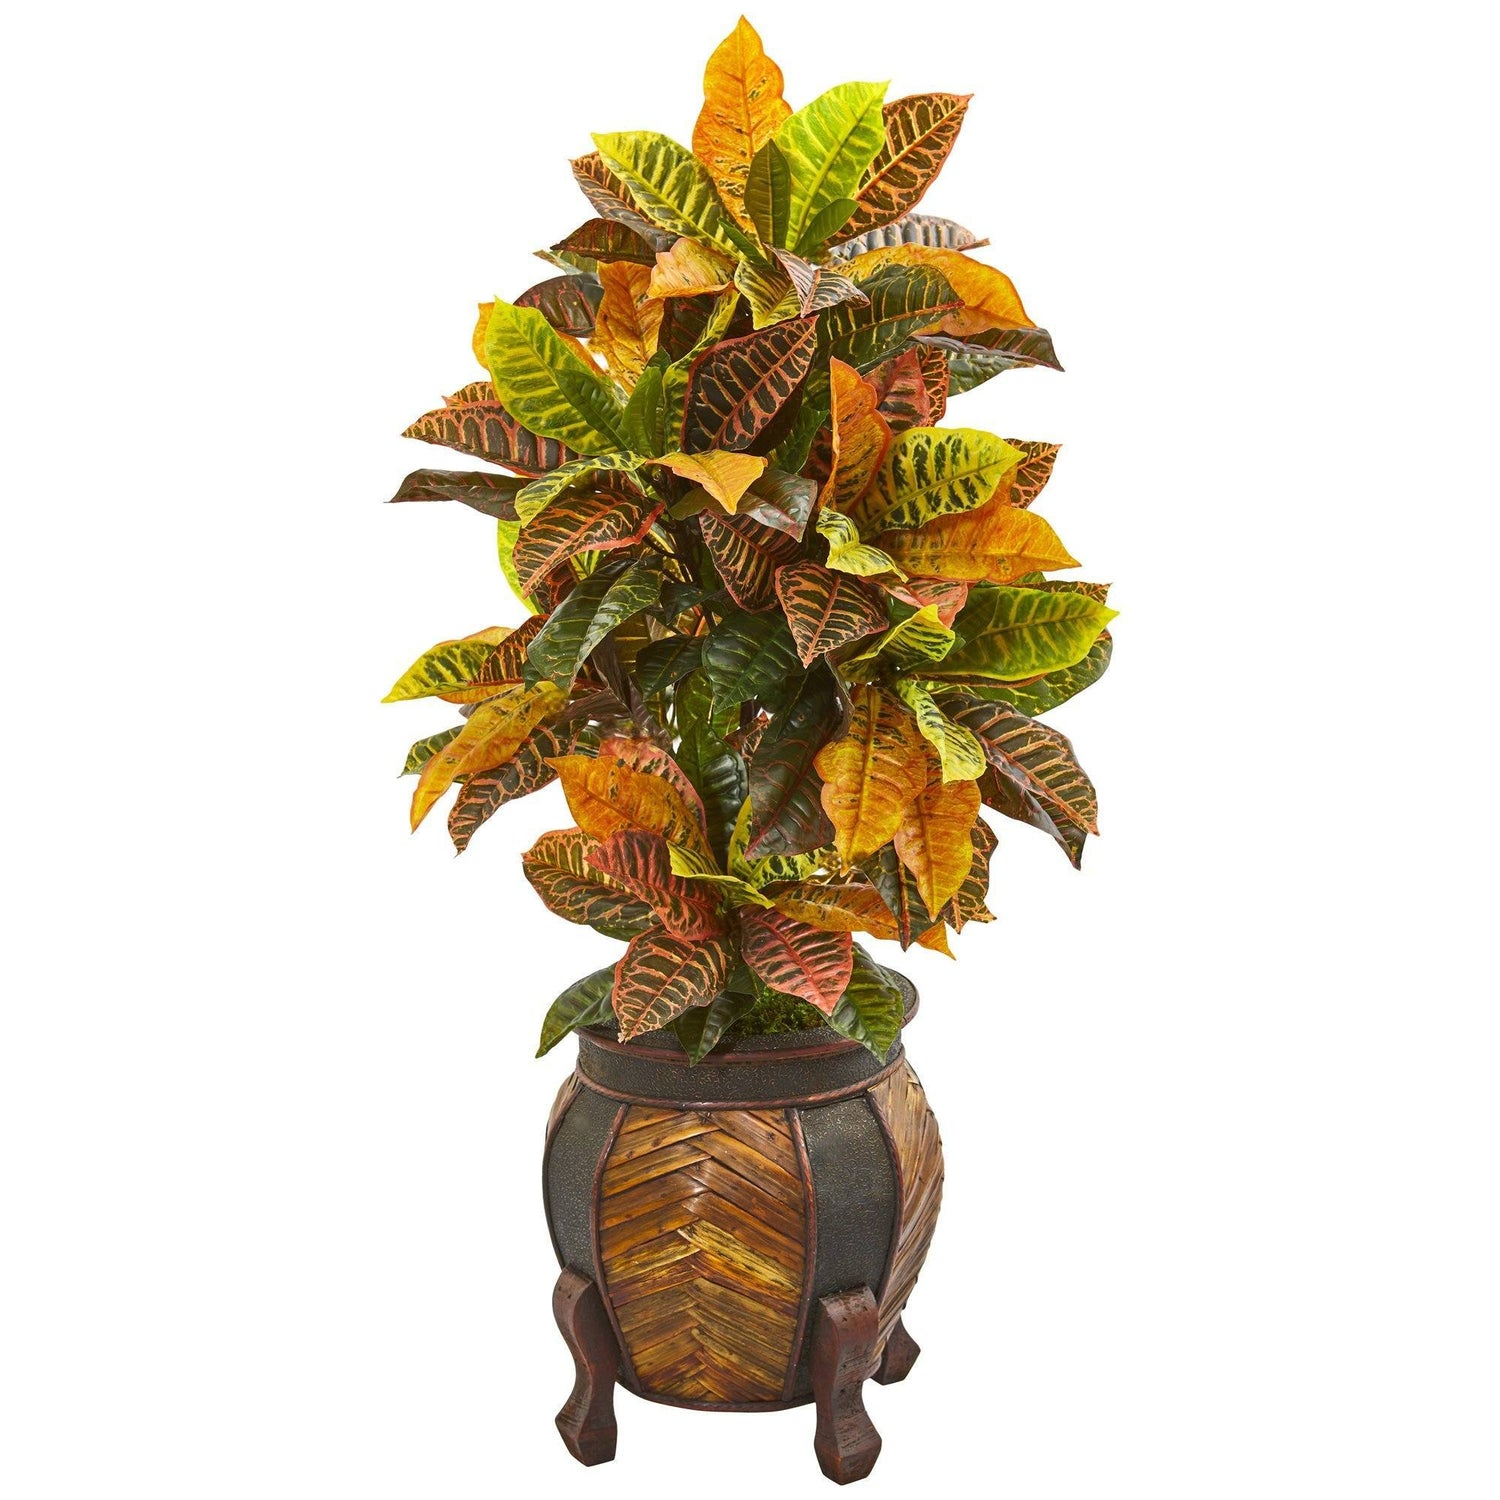 44” Croton Artificial Plant in Decorative Planter(Real Touch)